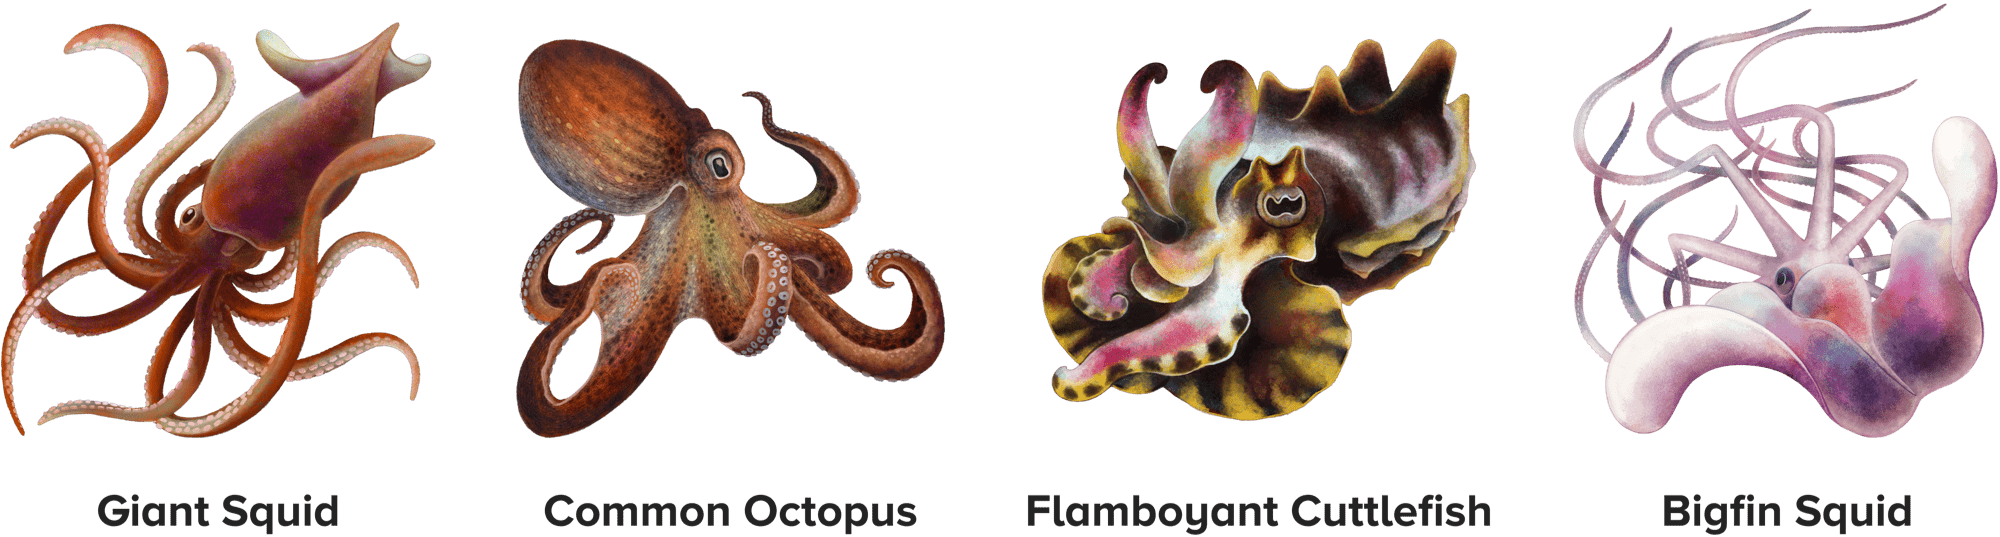 four illustrated cephalopods including the giant squid, common octopus, flamboyant cuttlefish, bigfin squid